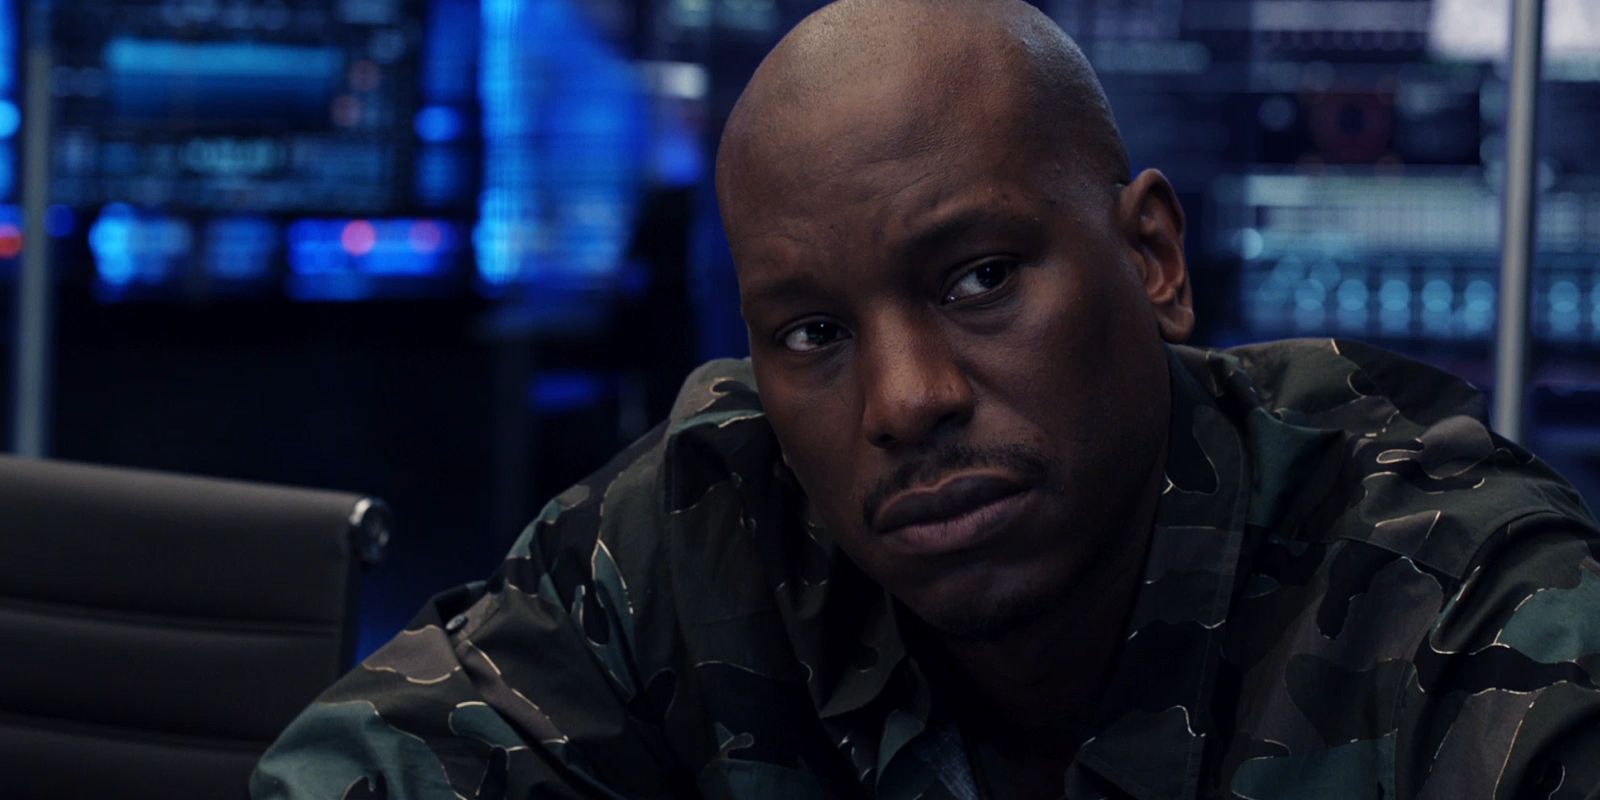 Tyrese Gibson as Roman Pearce in Fate of the Furious